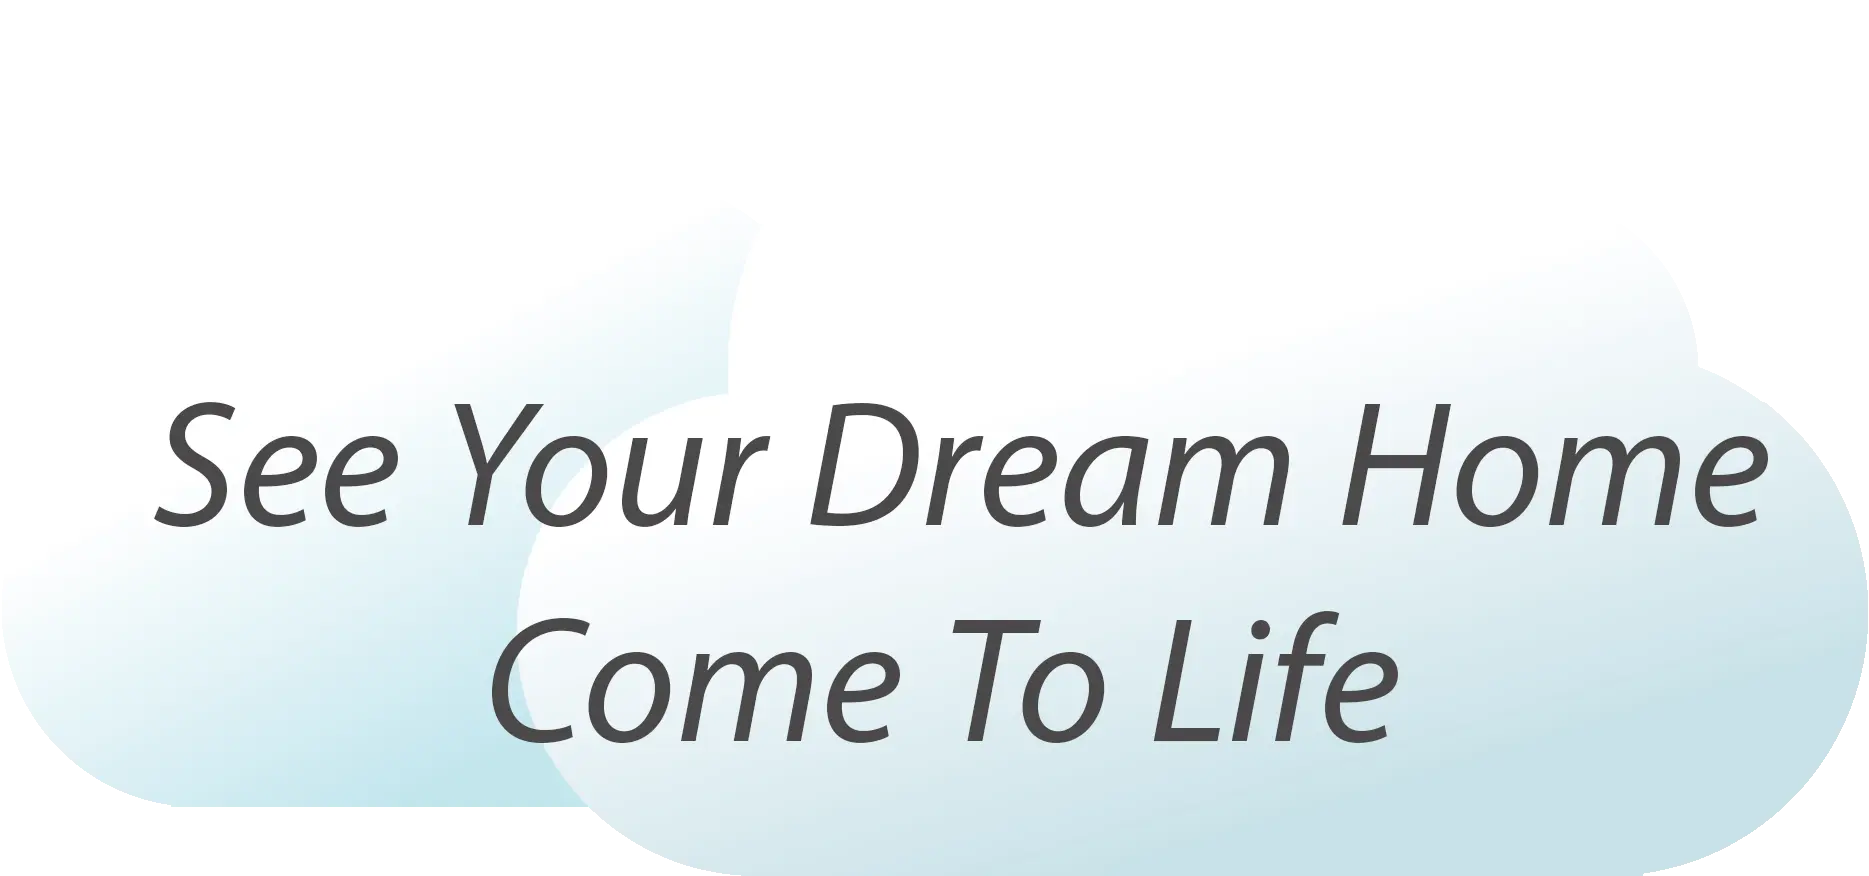 See your dream home come to life